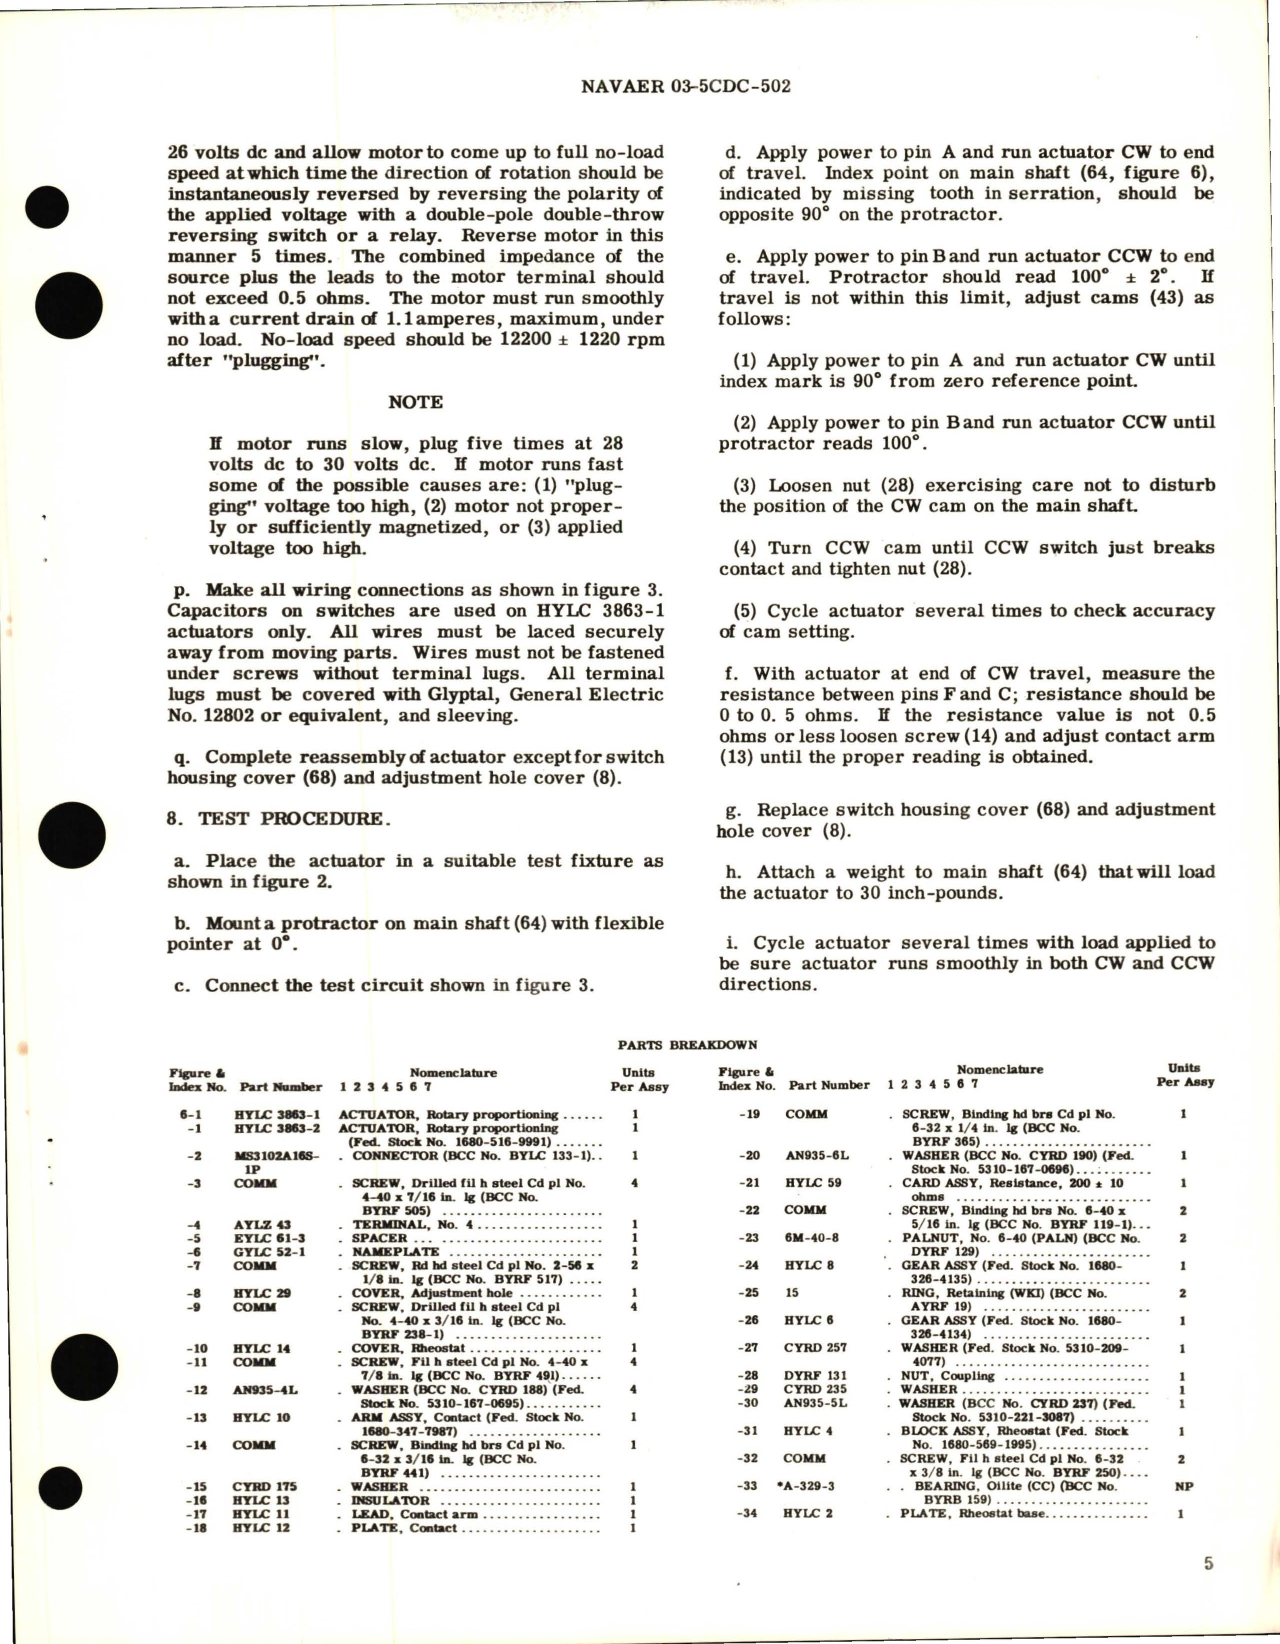 Sample page 5 from AirCorps Library document: Overhaul Instructions with Parts Breakdown for Rotary Proportioning Actuator - HYLC 3863-1 and HYLC 3863-2 